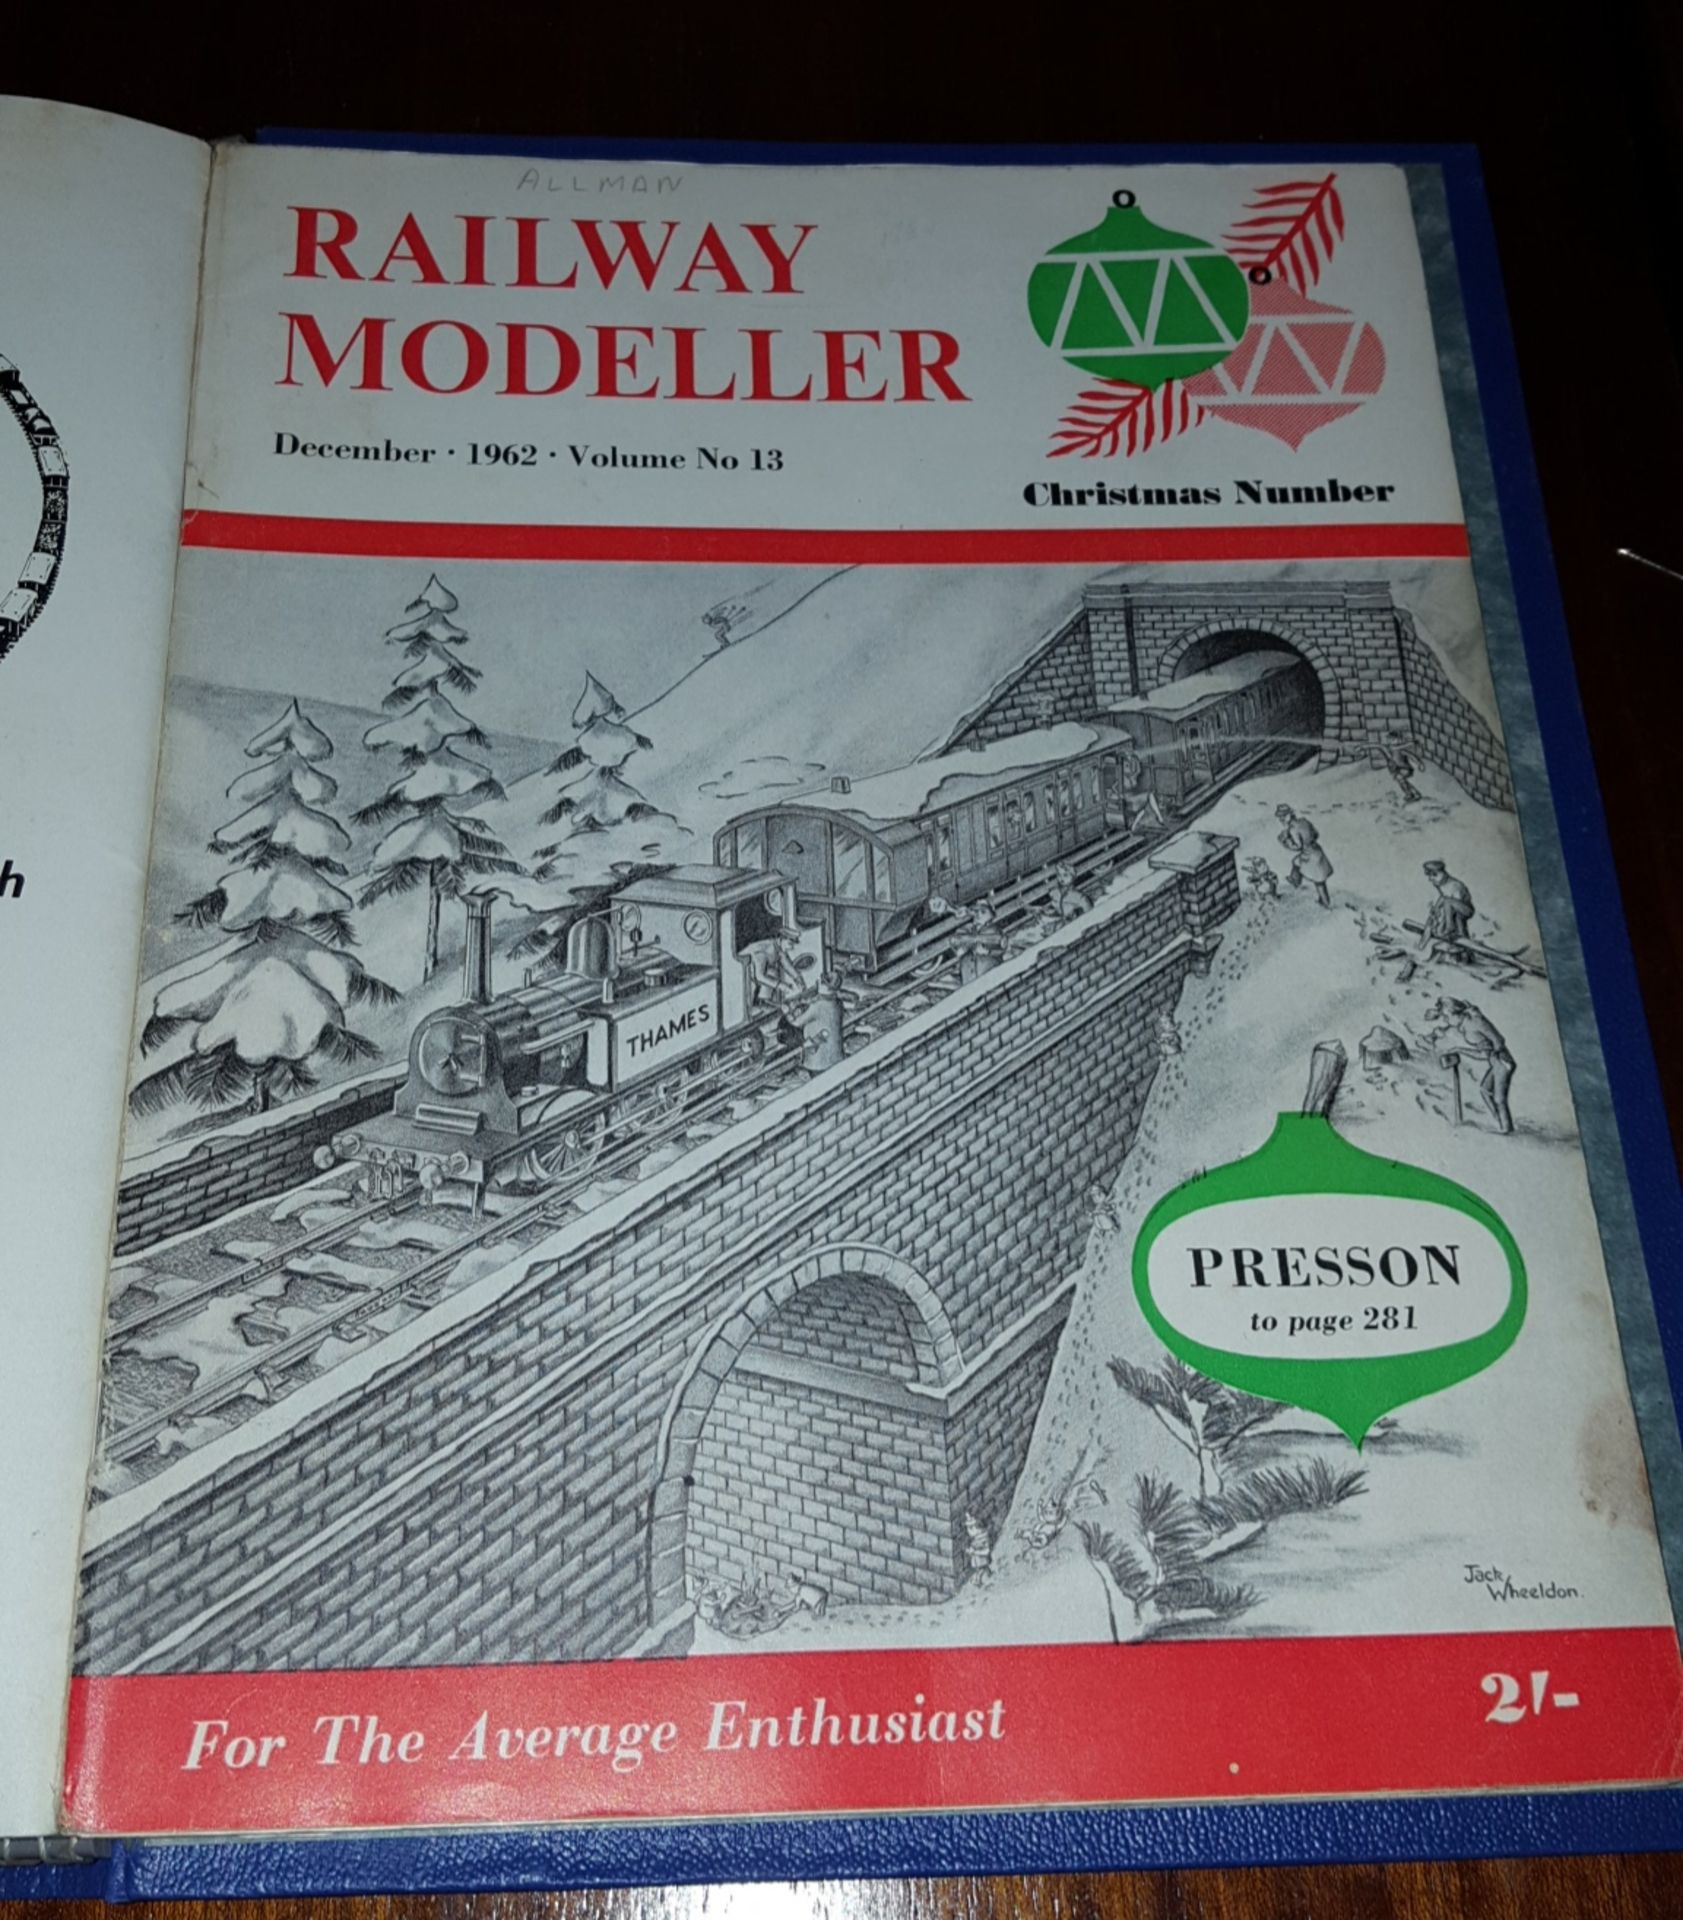 12 x Collectable Railway Magazines 'Railway Modeller' 1962 Complete Year Bound Copy No Reserve - Image 2 of 3